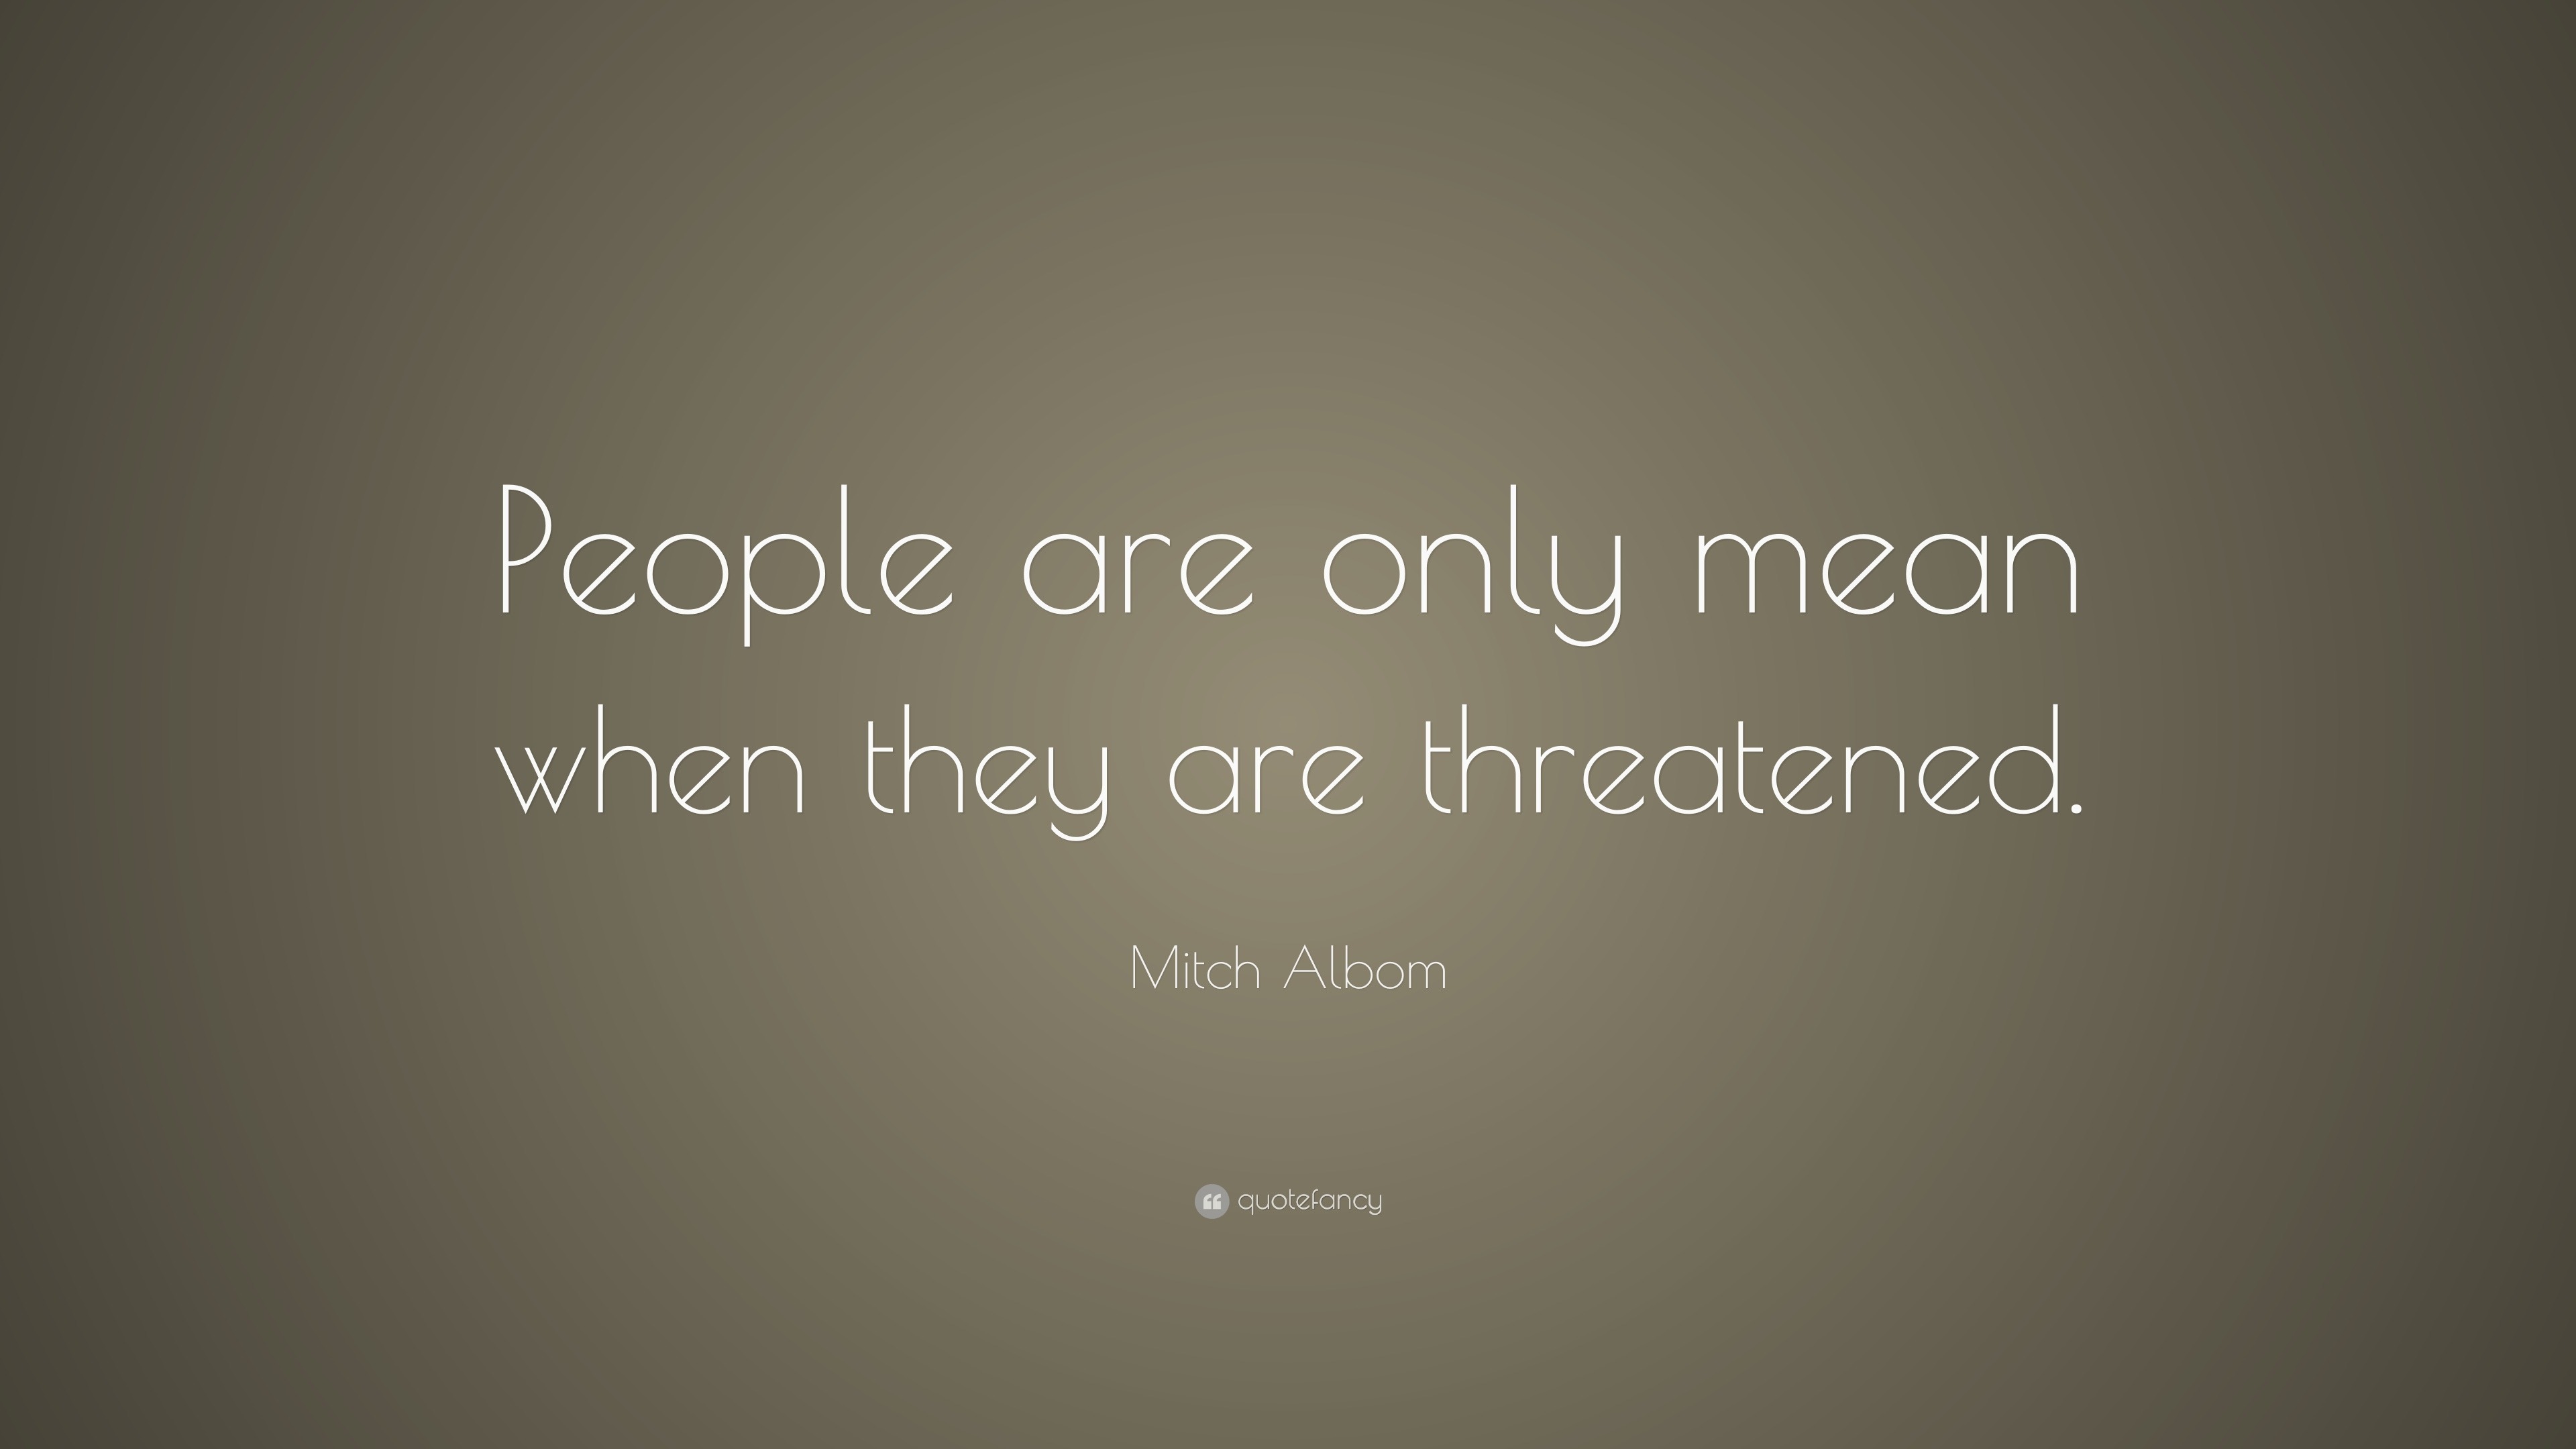 Mitch Albom Quote: “People are only mean when they are threatened.”